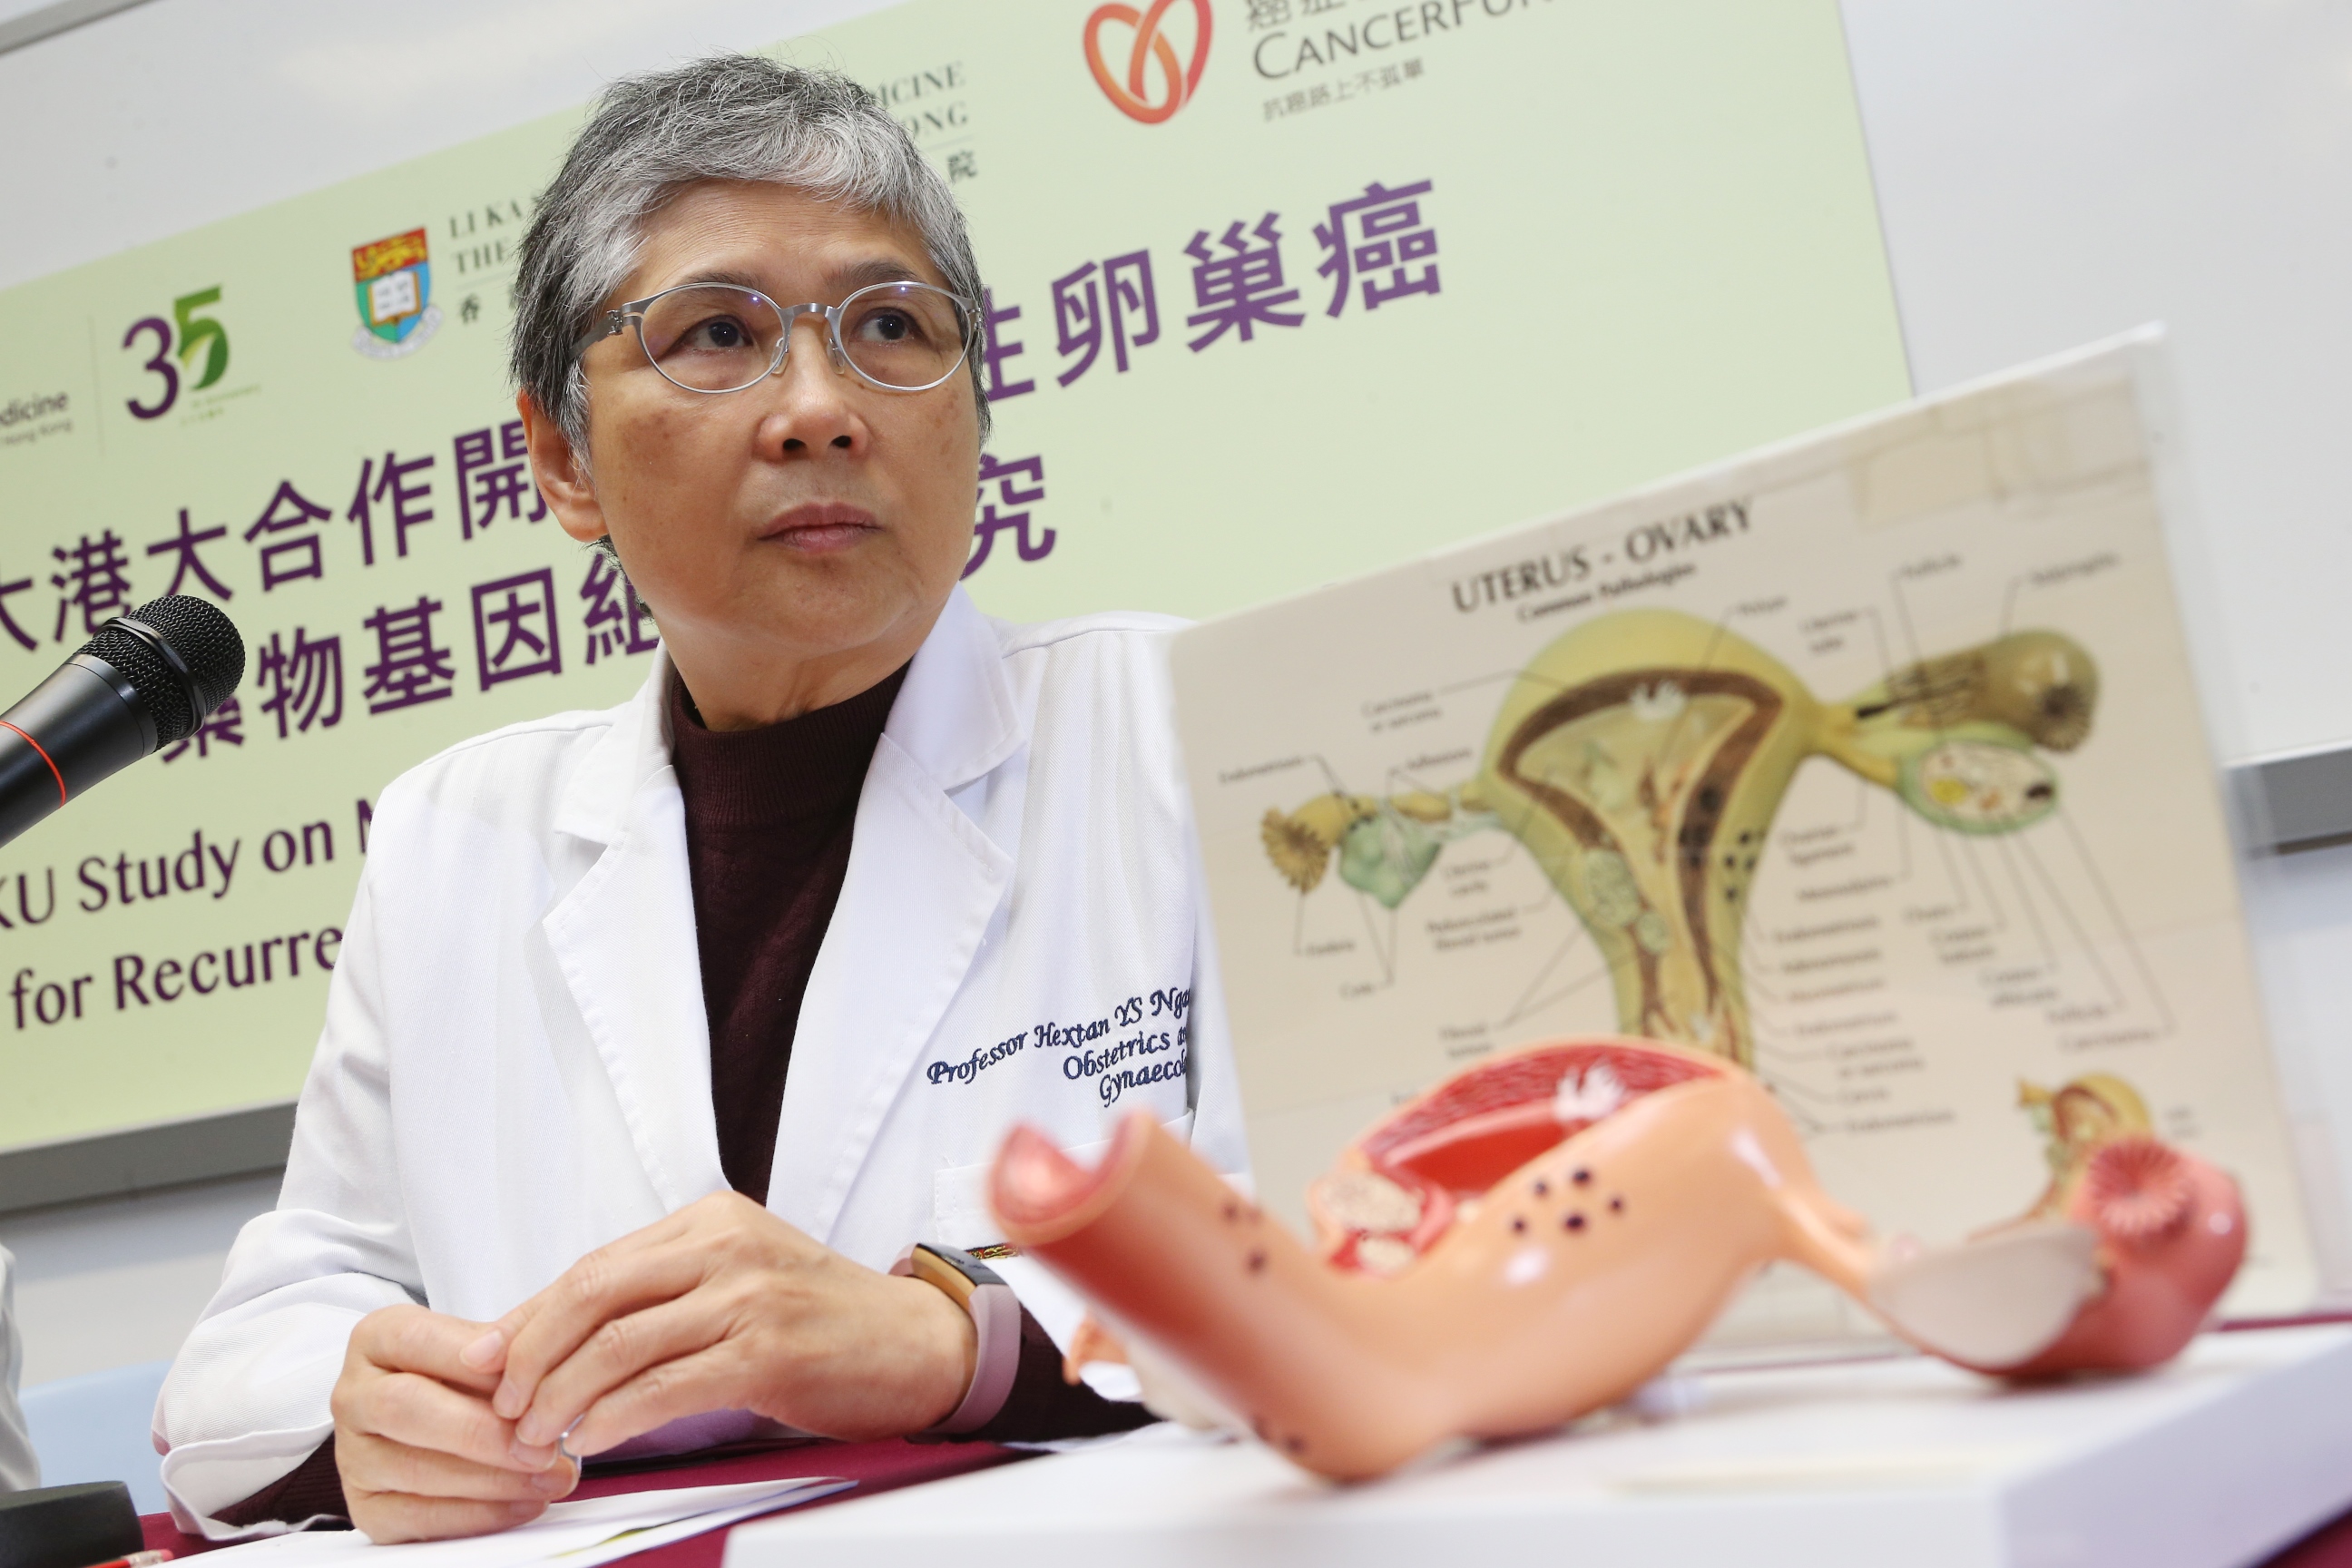 Professor NGAN says despite removal of all gross tumours, ovarian cancer recurrence would be up to 80% in late stage and therefore precise regimen is needed.